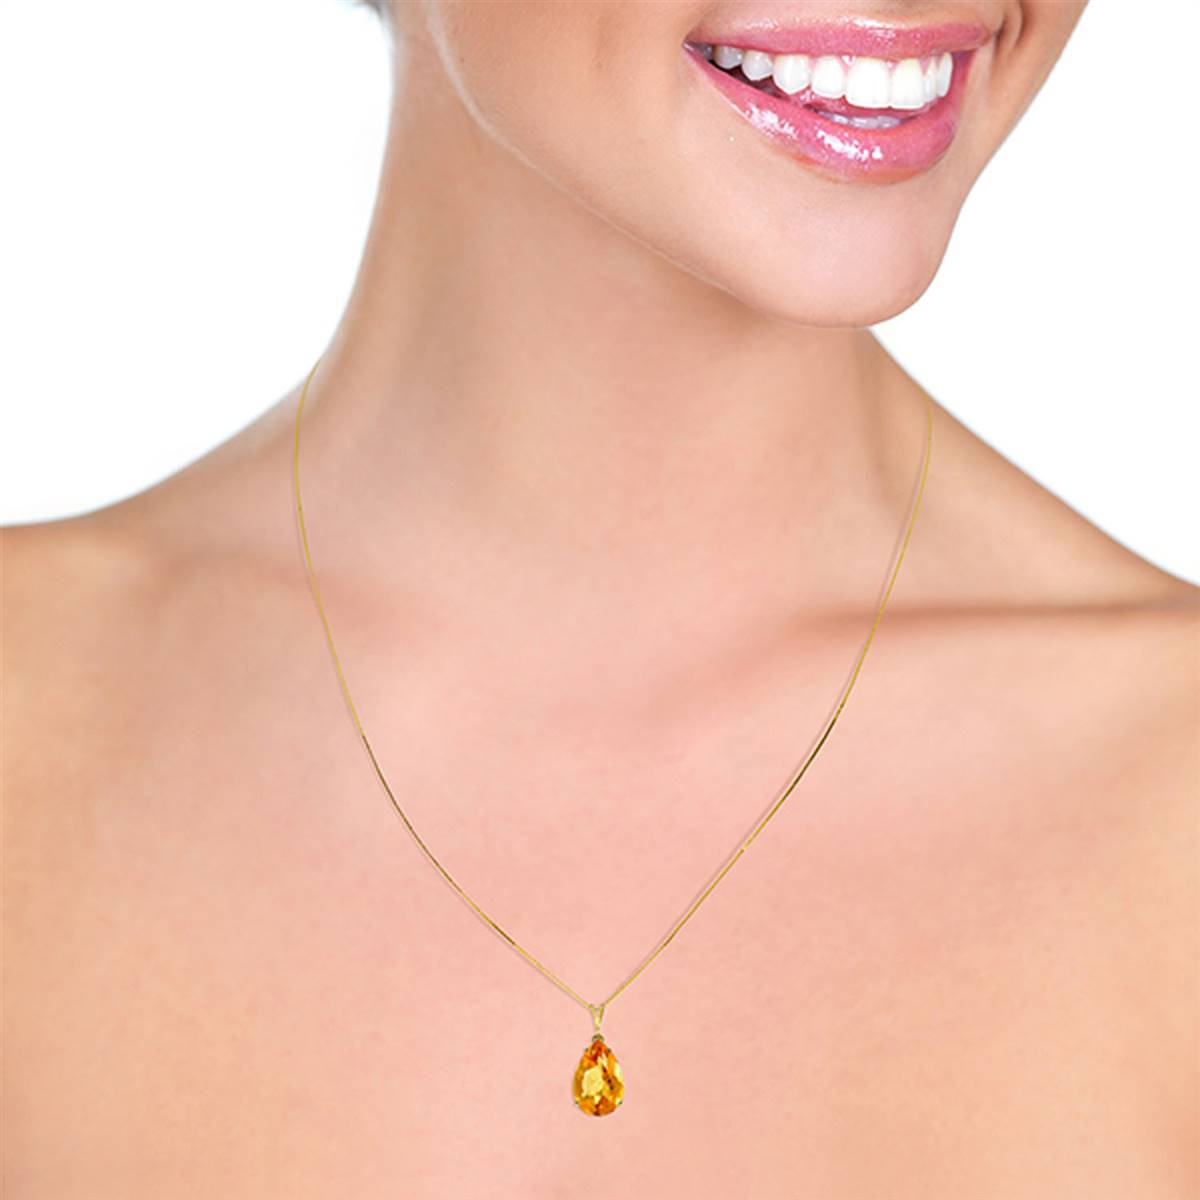 5 Carat 14K Solid Yellow Gold Only You Citrine Necklace